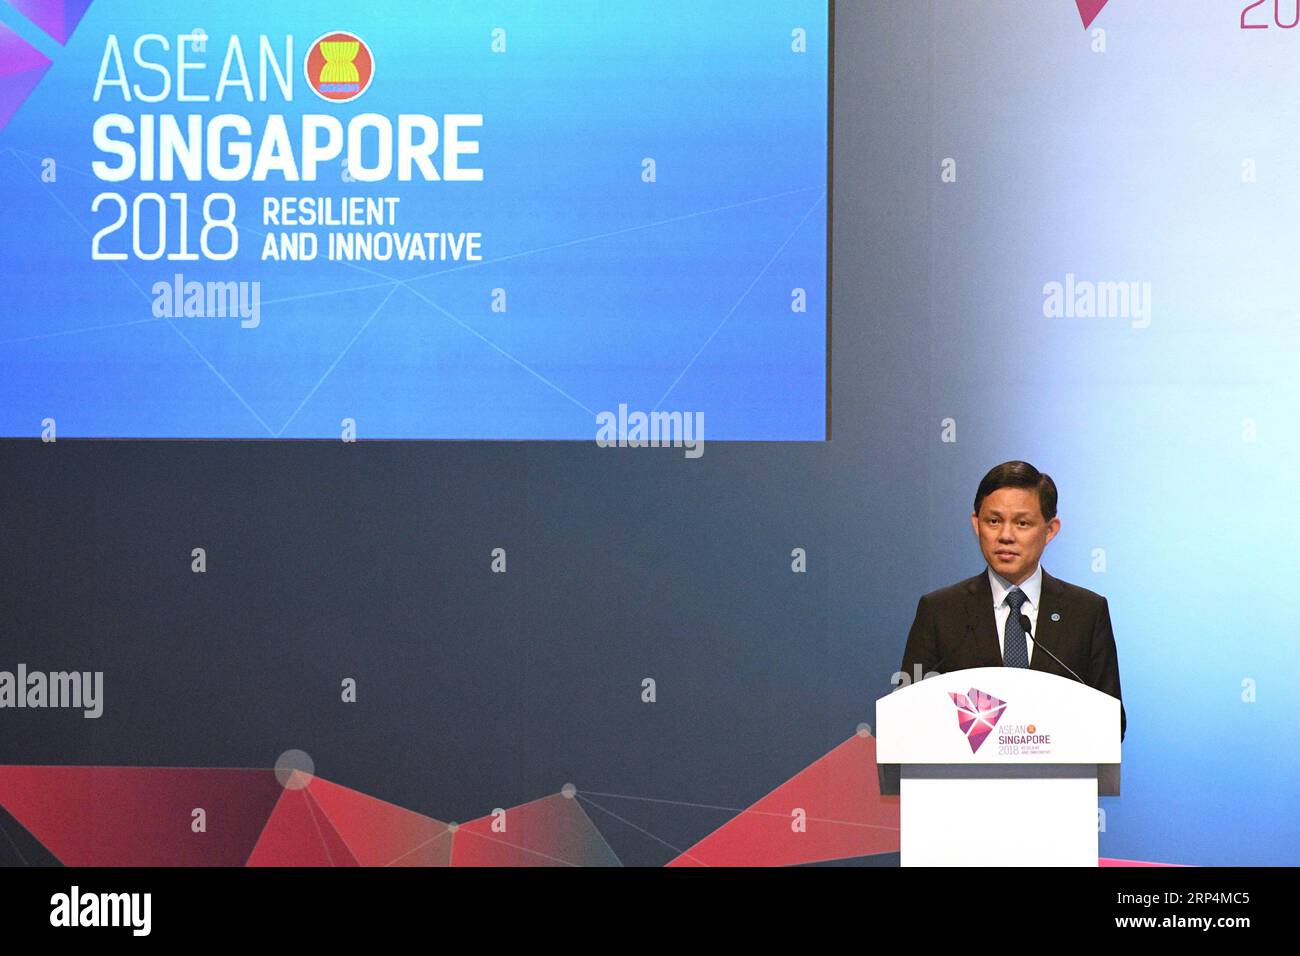 (181112) -- SINGAPORE, Nov. 12, 2018 -- Singaporean Minister for Trade and Industry Chan Chun Sing speaks during the signing ceremony of ASEAN s agreement on e-commerce, in Singapore, on Nov. 12, 2018. Trade ministers of the Association of Southeast Asian Nations (ASEAN) member states signed an agreement on e-commerce on Monday, encouraging paperless trading between businesses and governments of the bloc to generate rapid and efficient transactions. ) (nxl) SINGAPORE-ASEAN-E-COMMERCE-AGREEMENT ThenxChihxWey PUBLICATIONxNOTxINxCHN Stock Photo